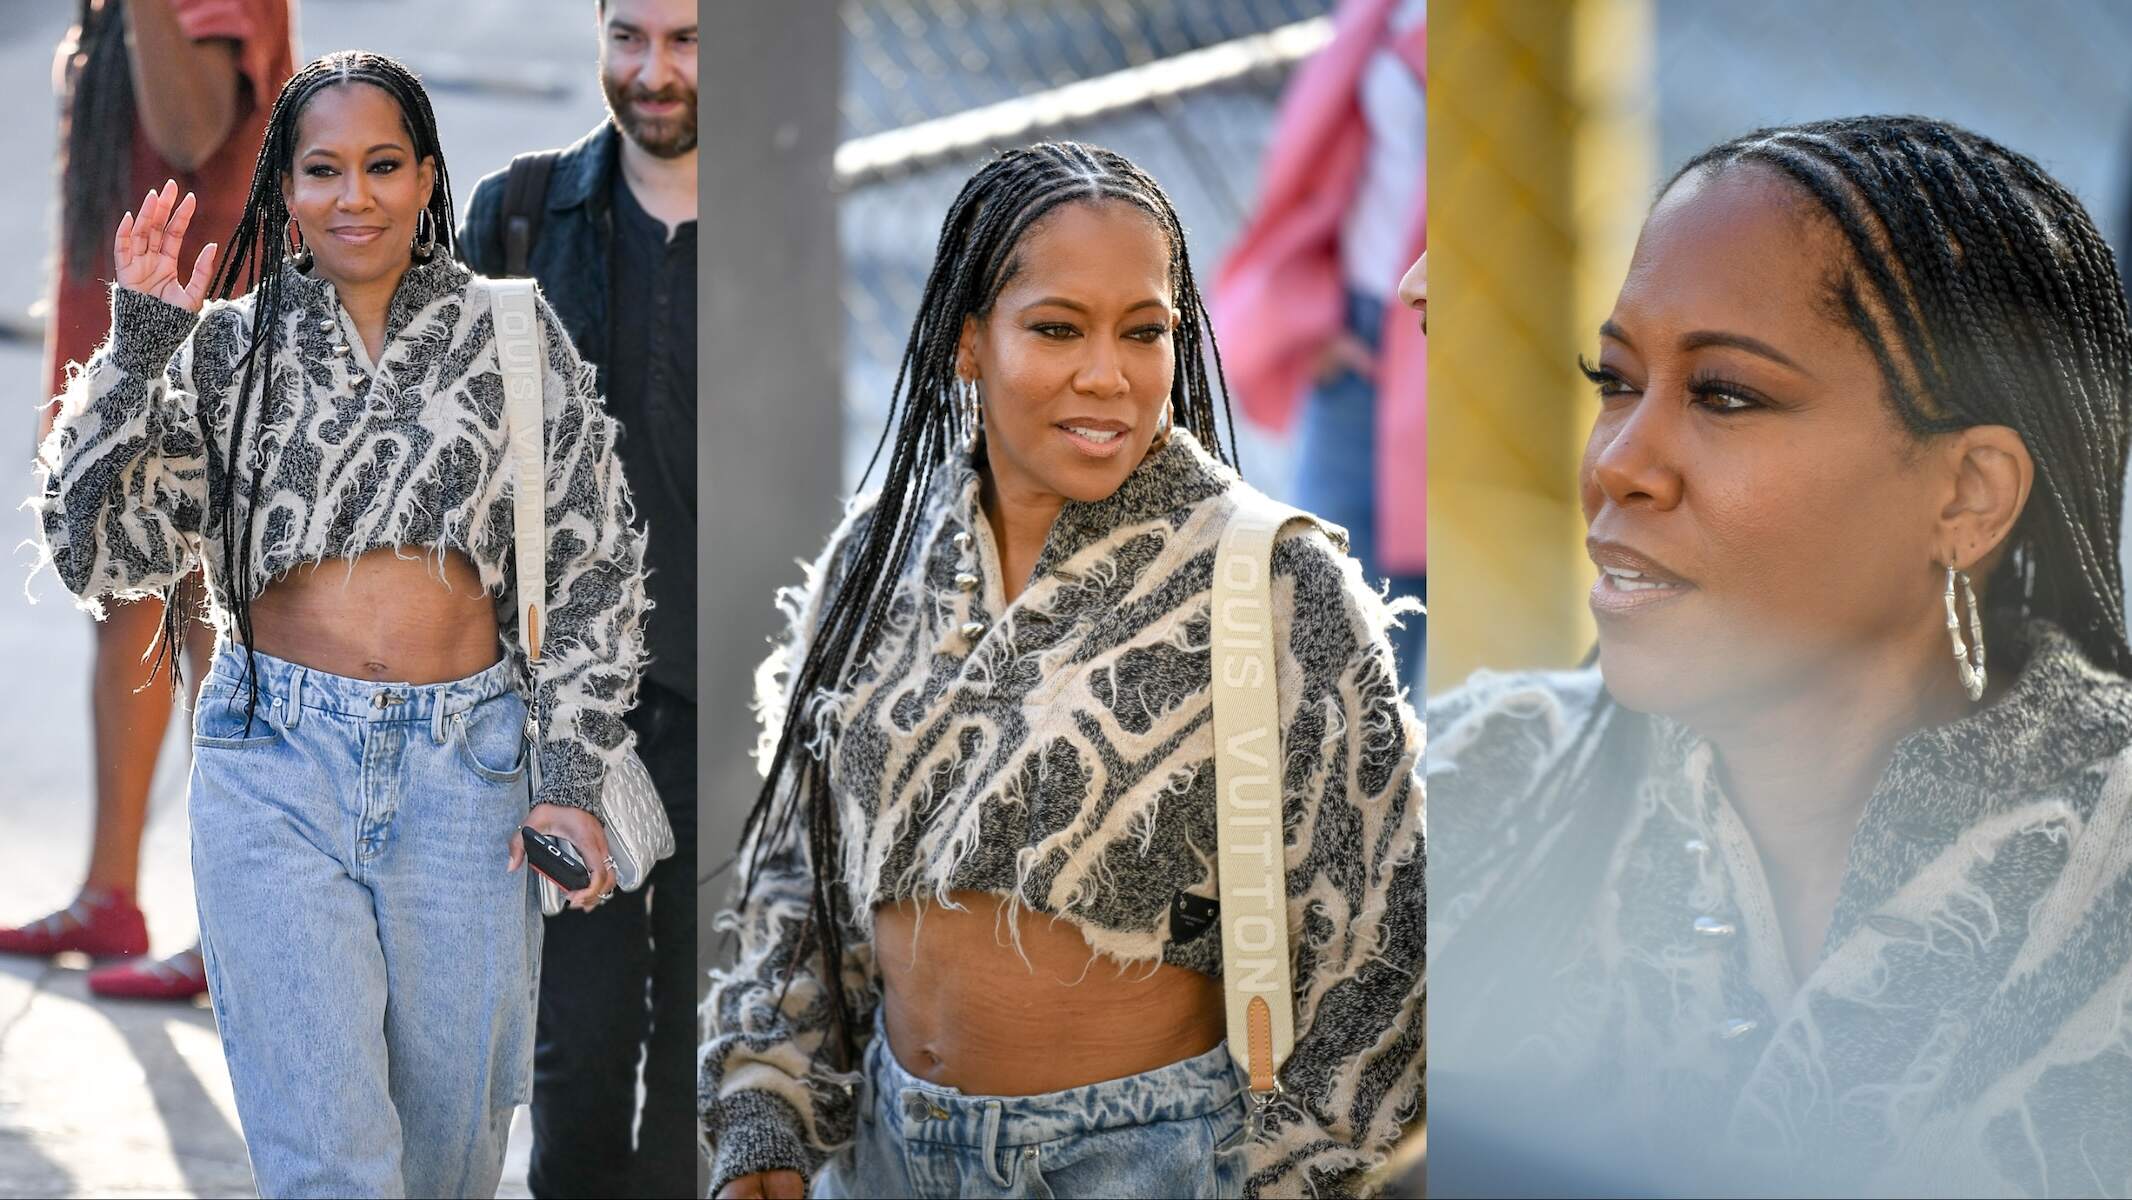 Wearing baggy jeans and a crop top, Regina King waves to fans while walking in NYC